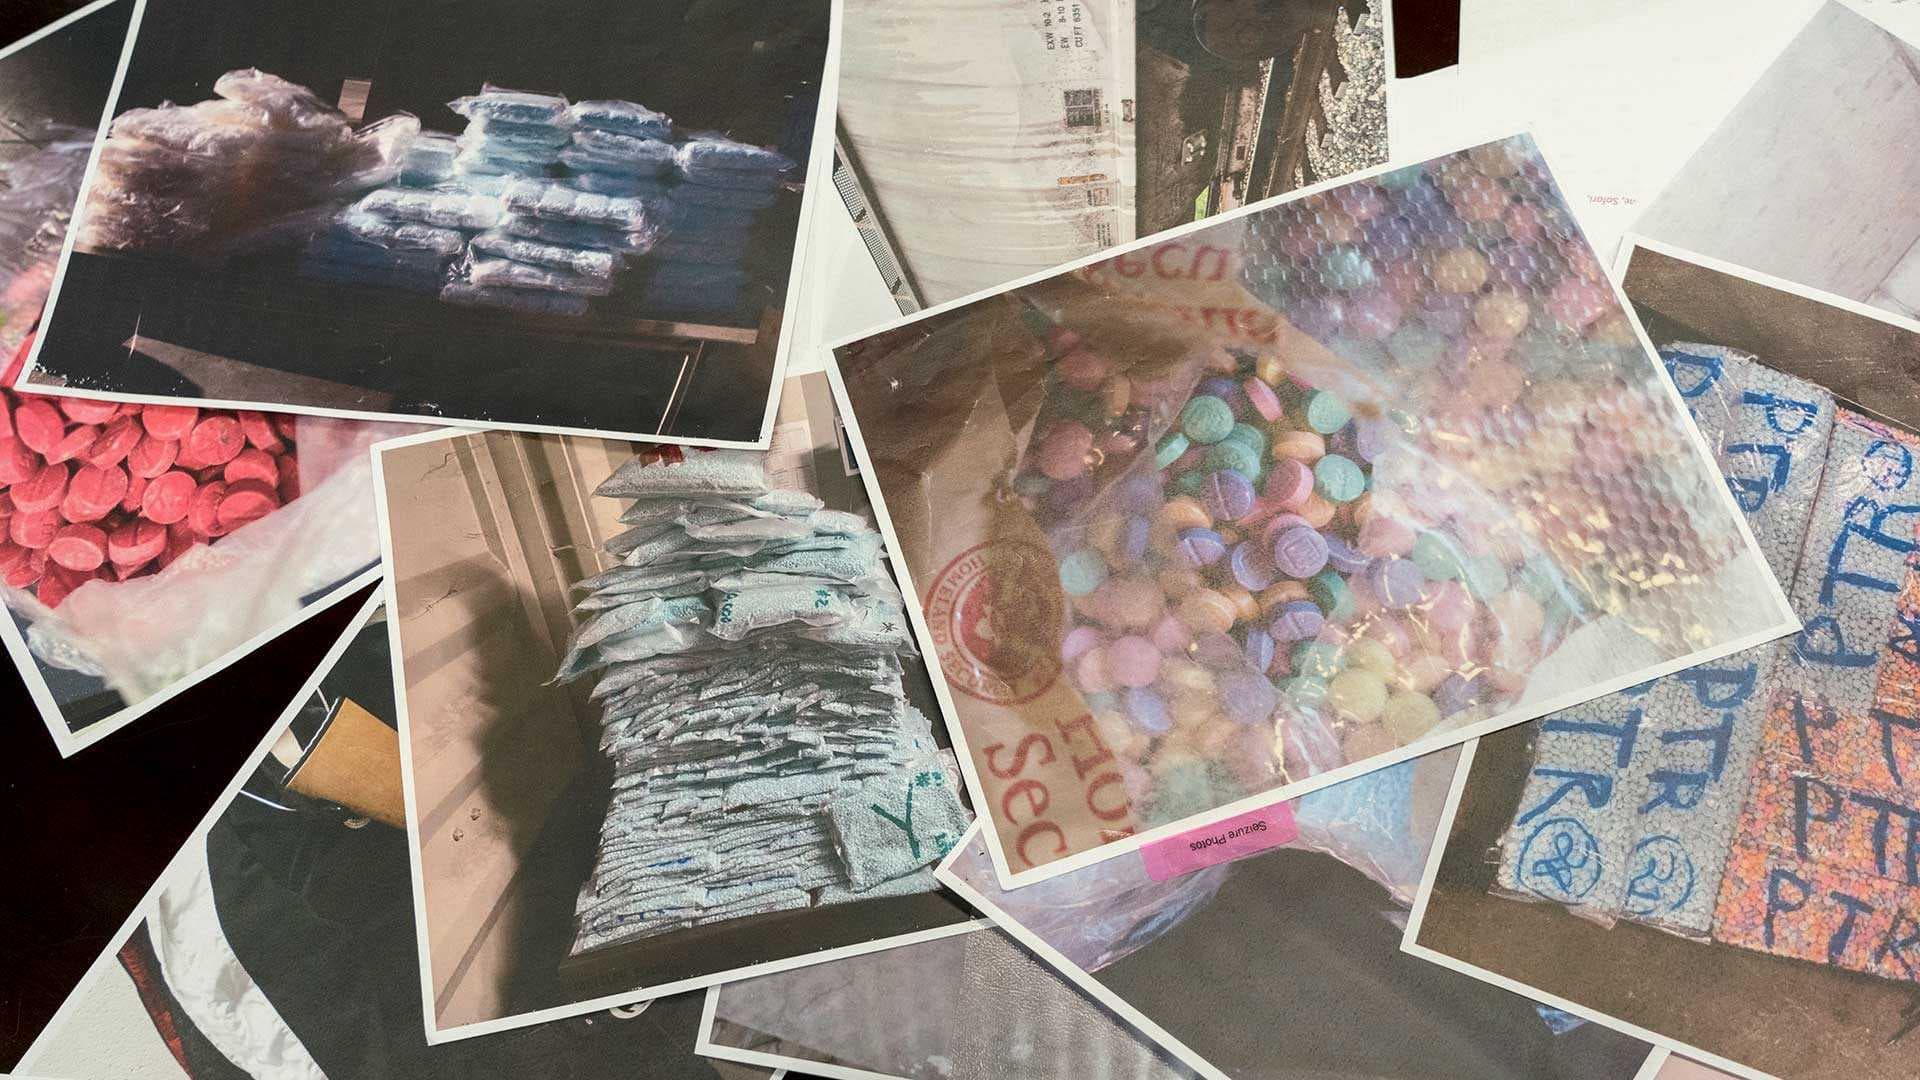 photographs of seized fentanyl, weapons and other illicit drugs